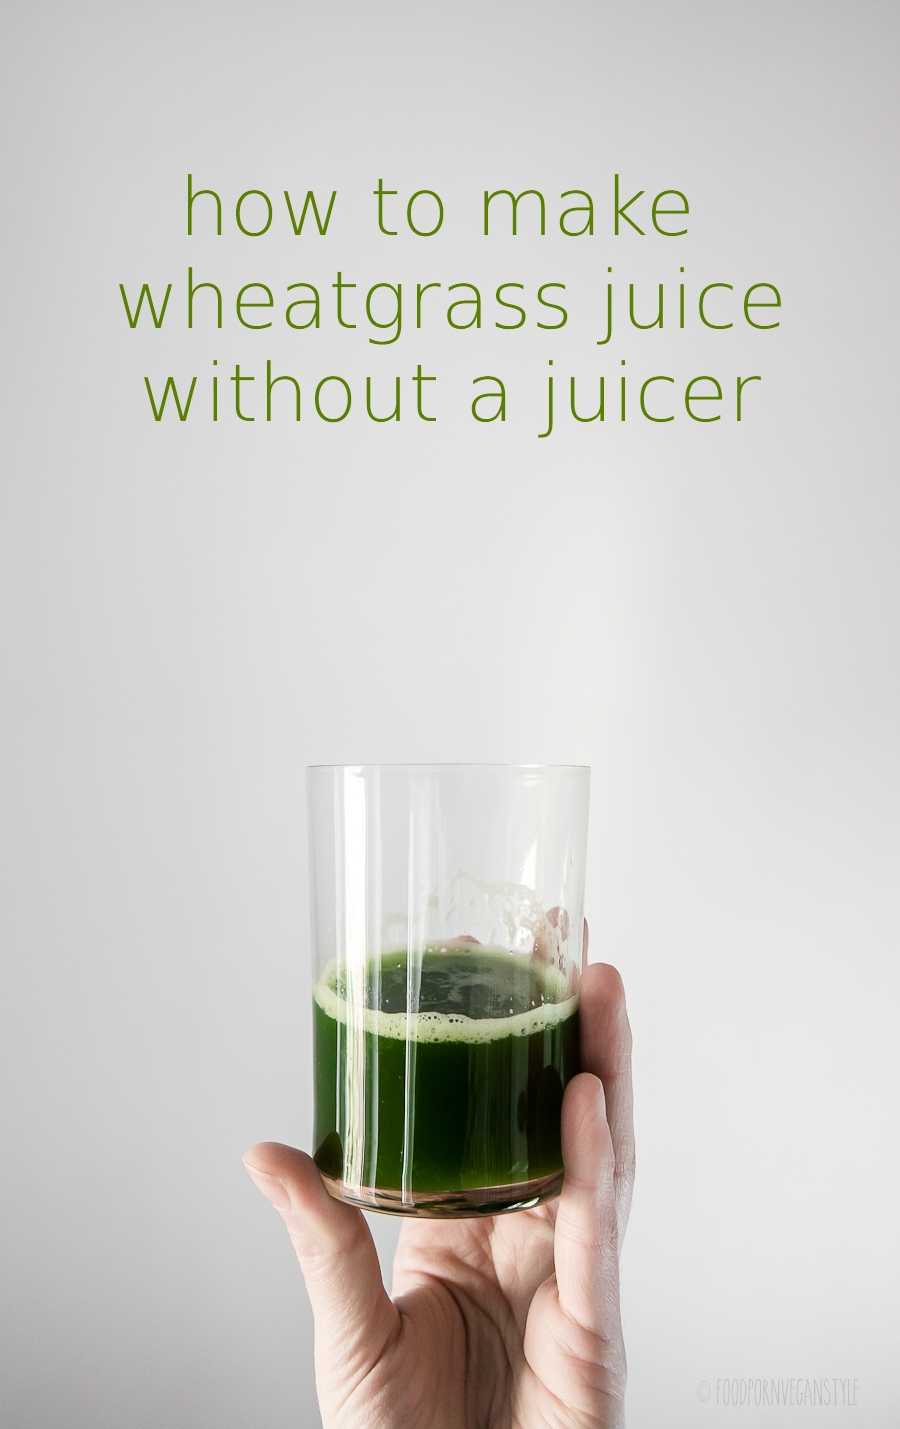 How to make wheatgrass juice without a juicer